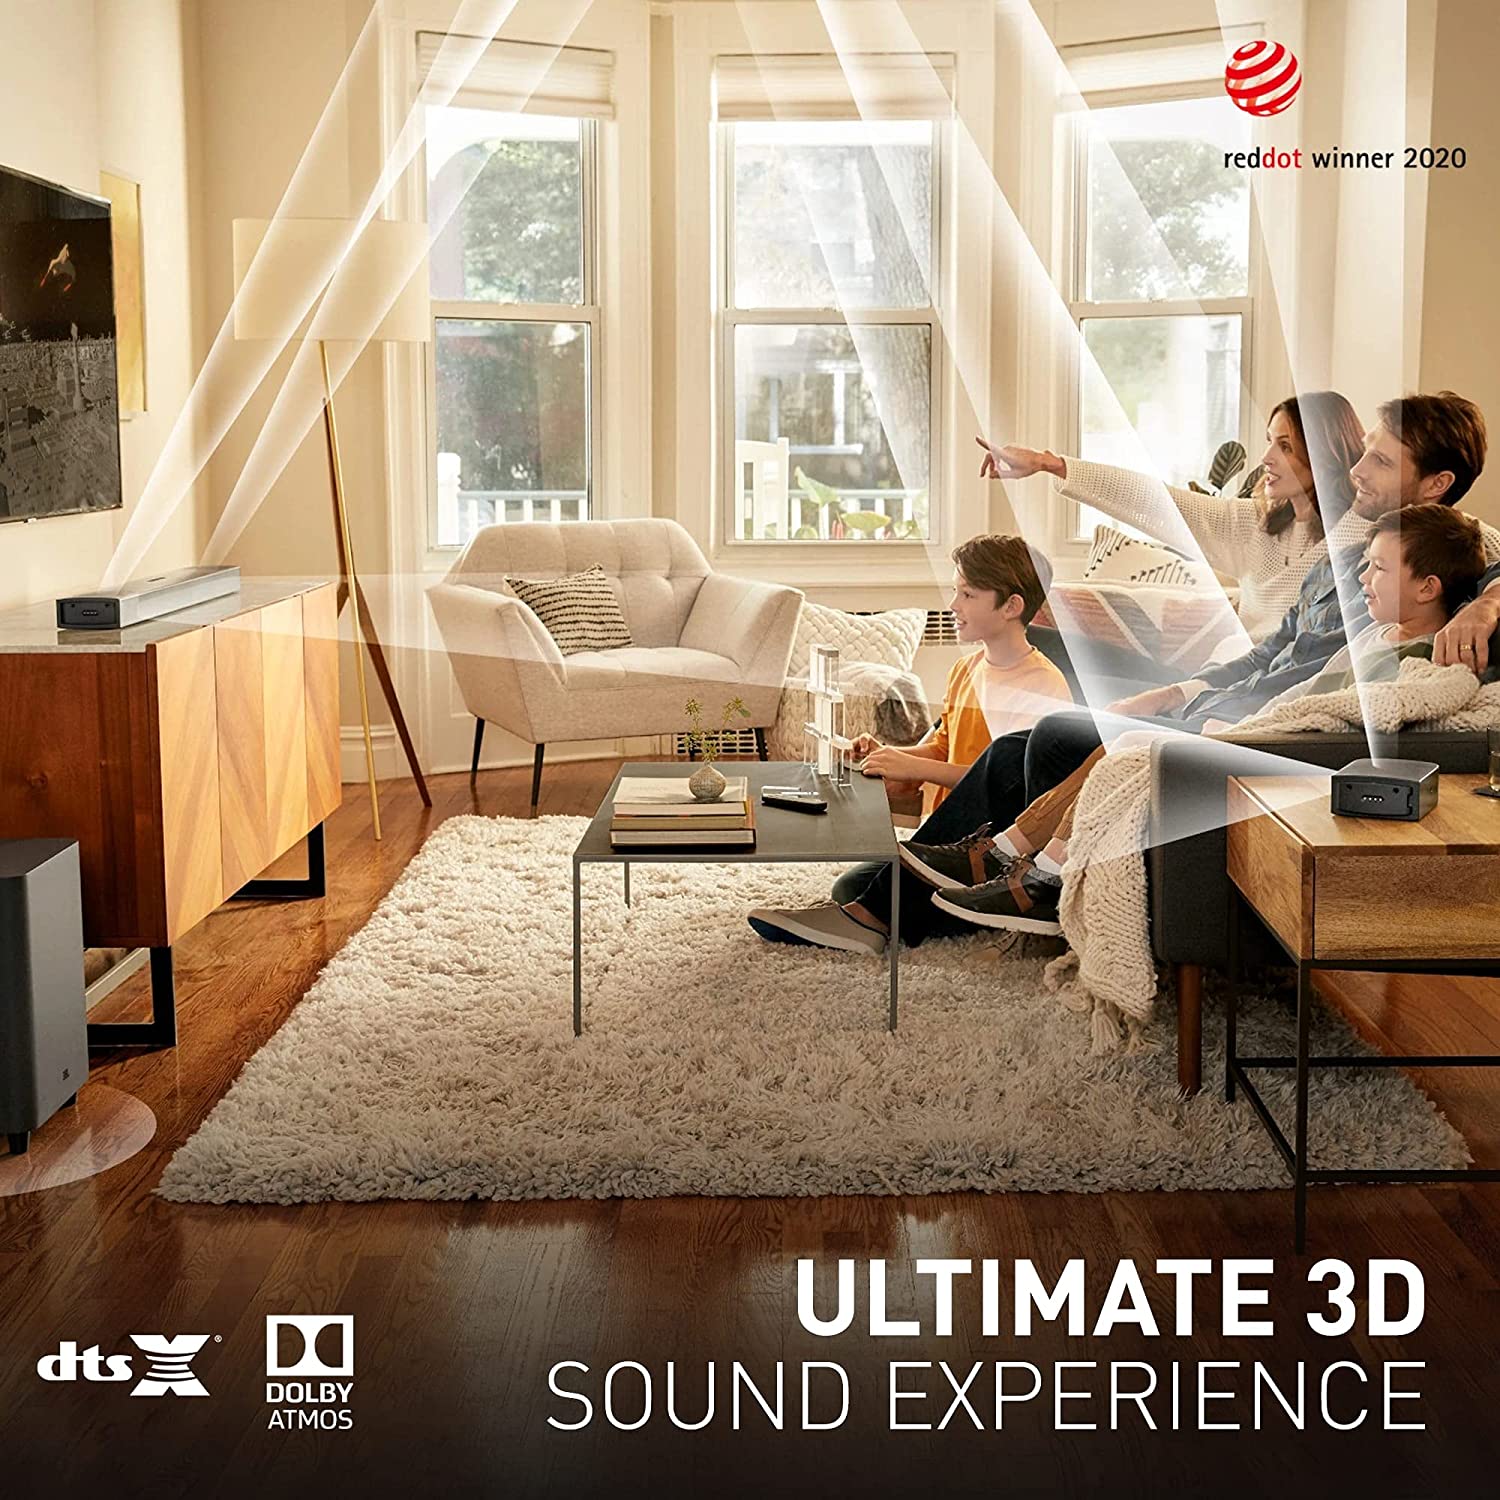 JBL - BAR 9.1 WITH DOLBBY ATOMS 3D SURROUND SOUND TO TAKE YOU RIGHT  INTO THE SCENE